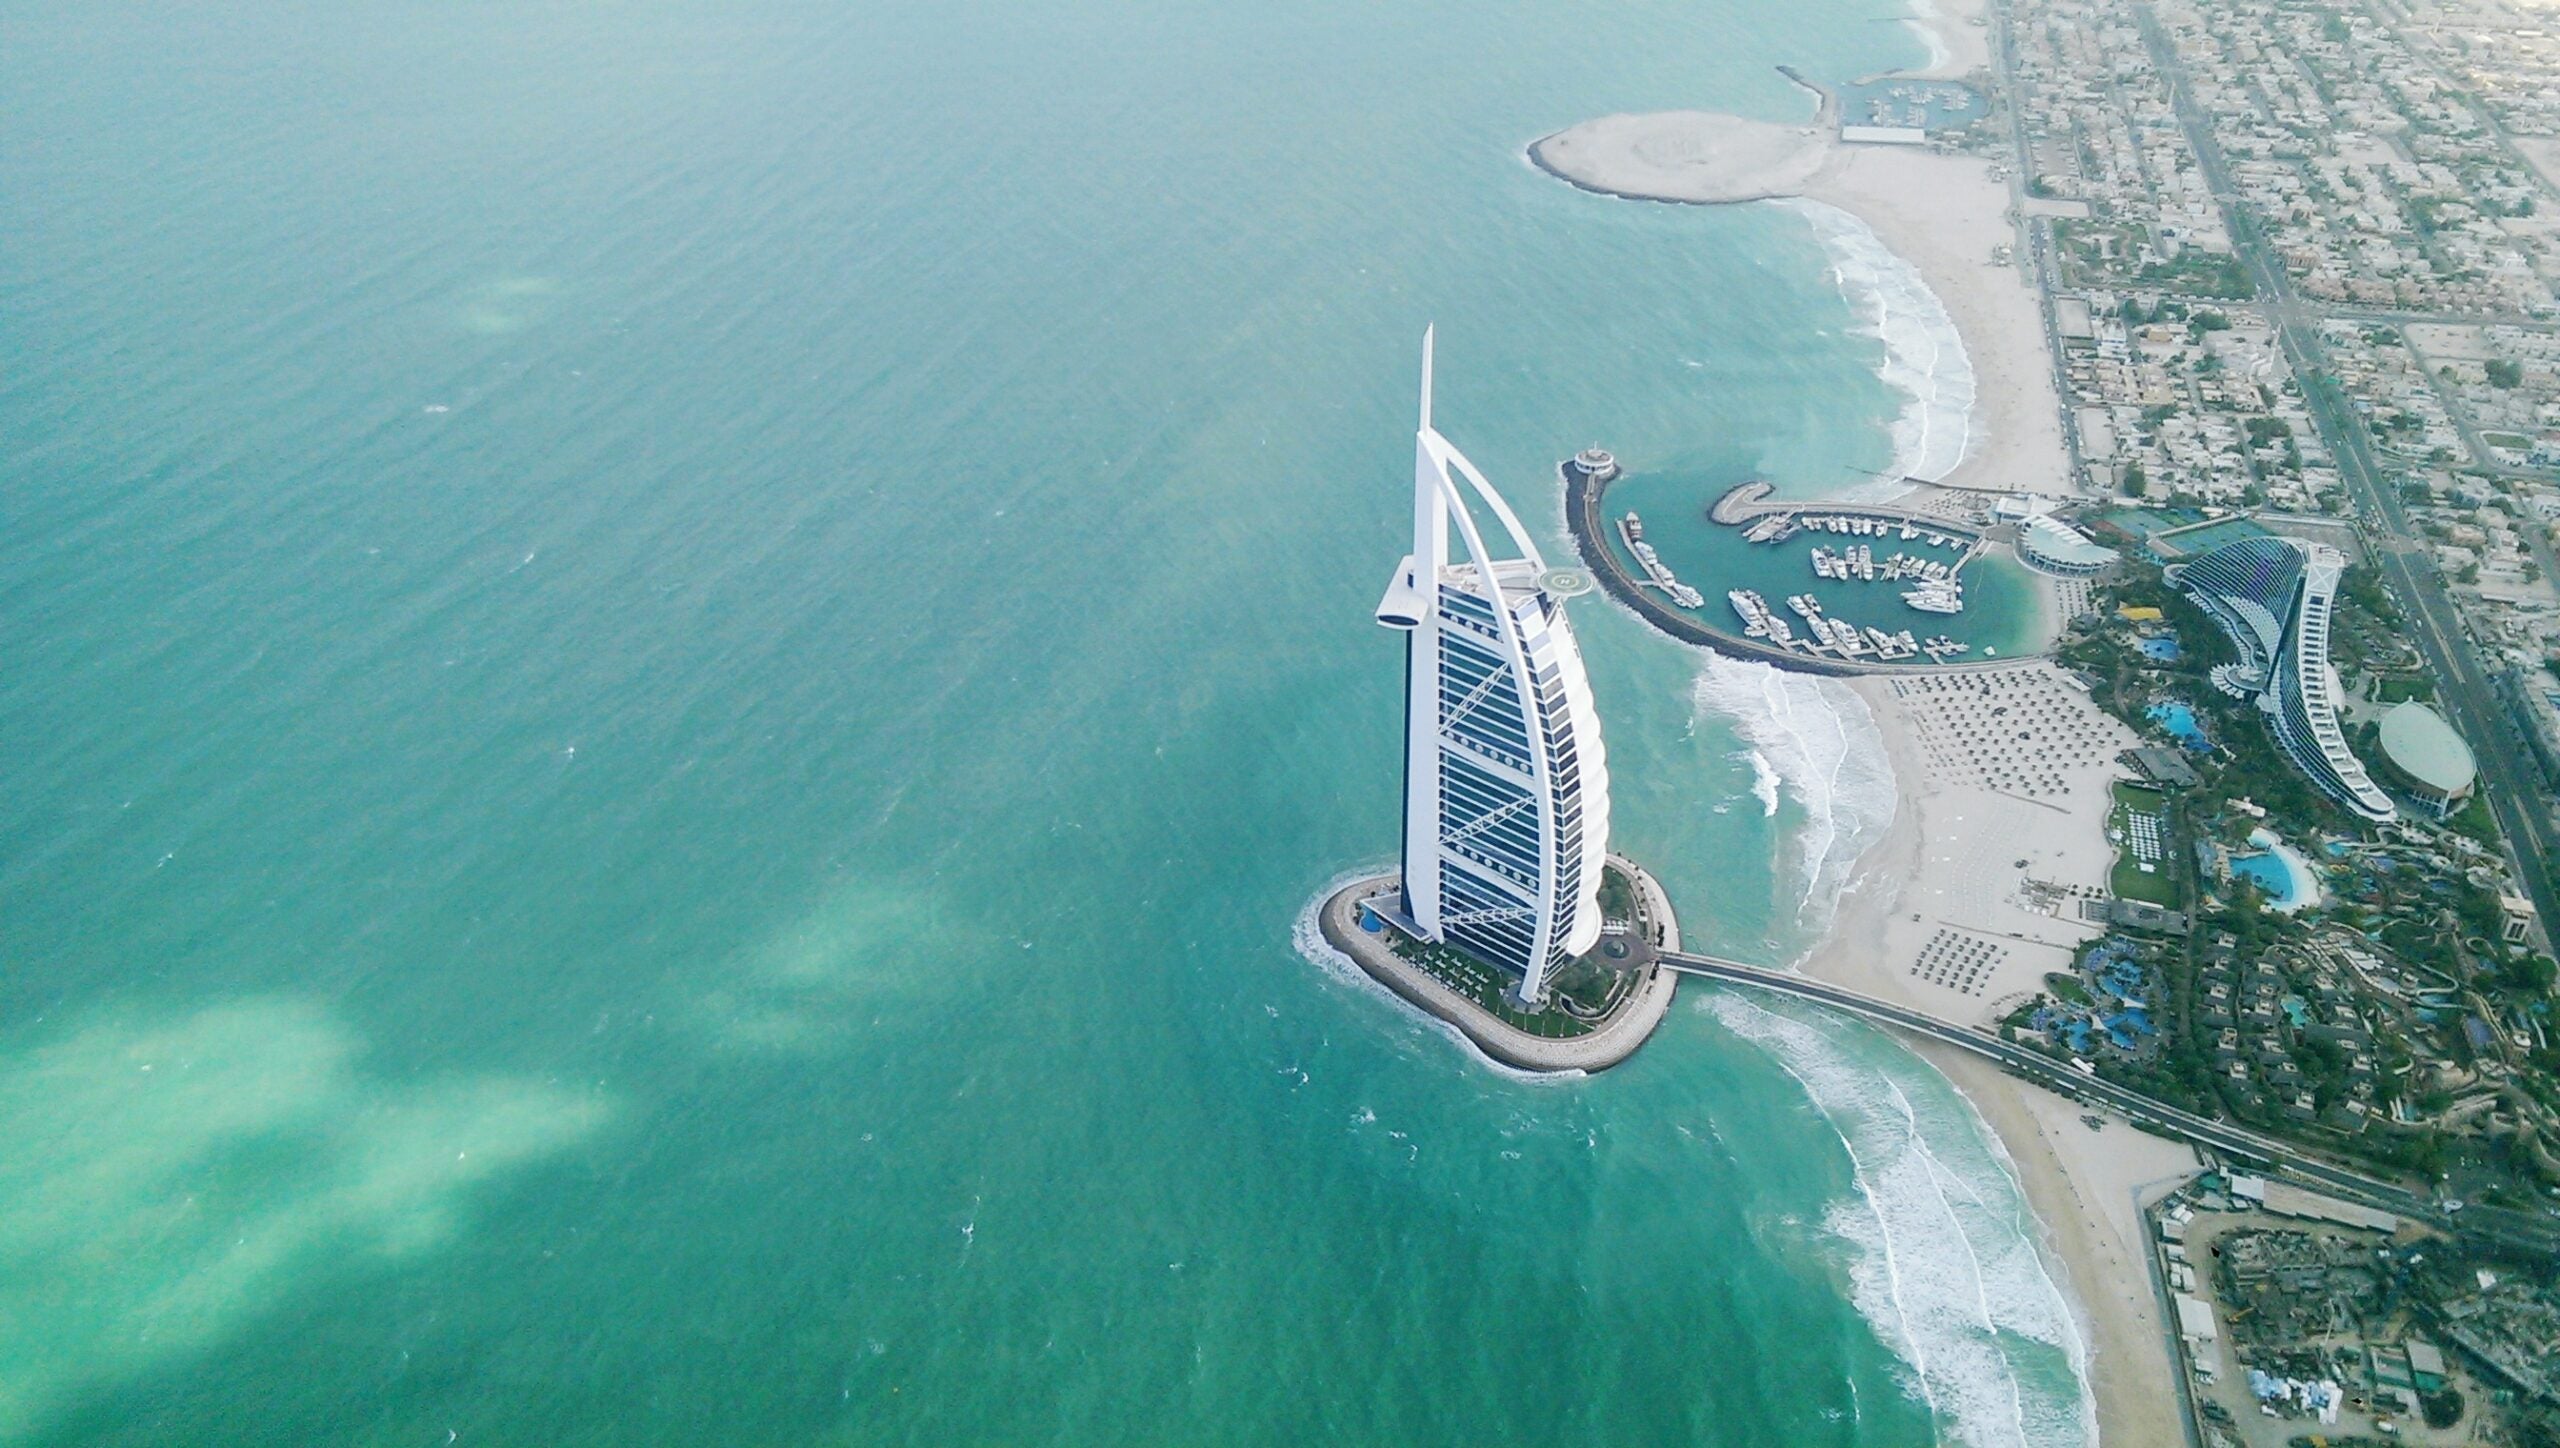 You can now purchase tickets to tour Dubai's most famous hotel